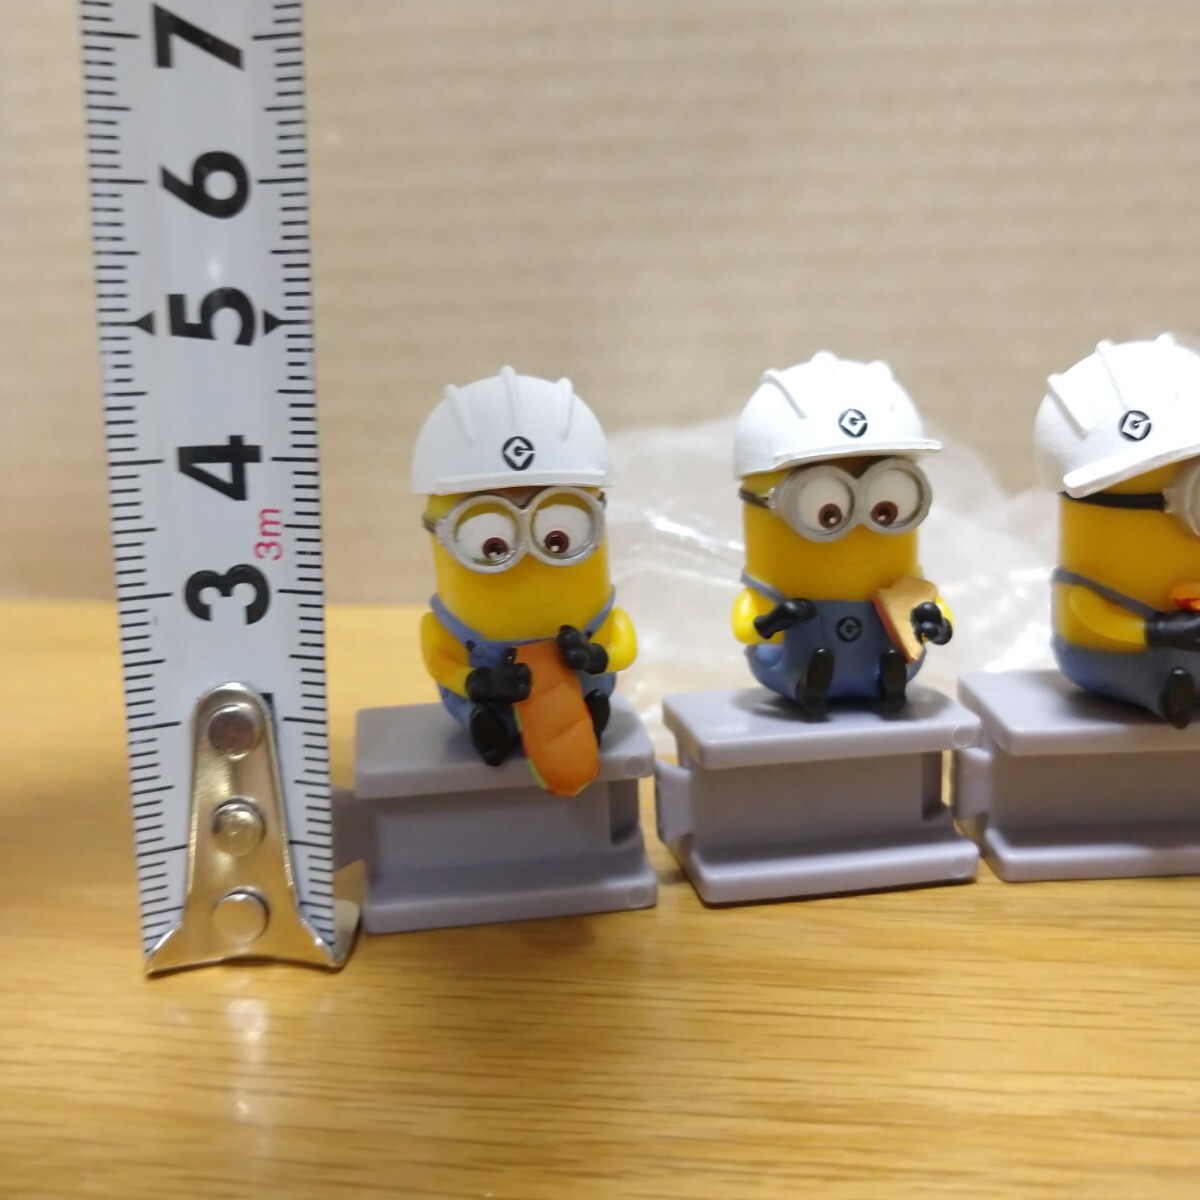 minions minion 工事現場 工事 工場 作業員 フィギュア コレクション ミニオンズ ミニオン パン ご飯 collection toy lunch time figureの画像4